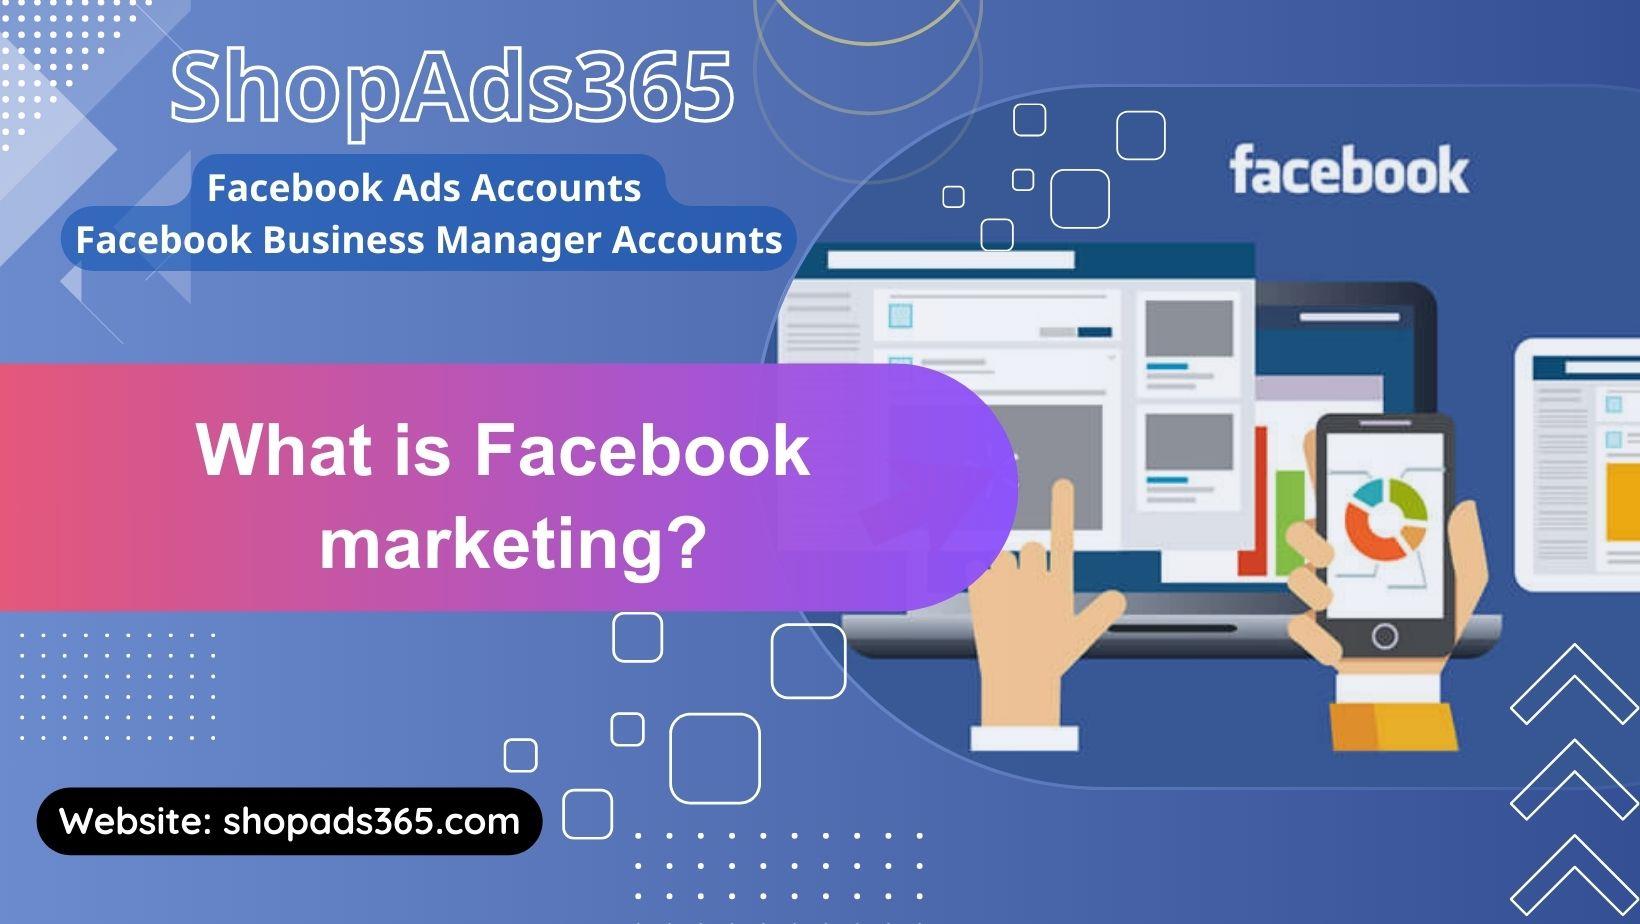 What is Facebook Marketing?